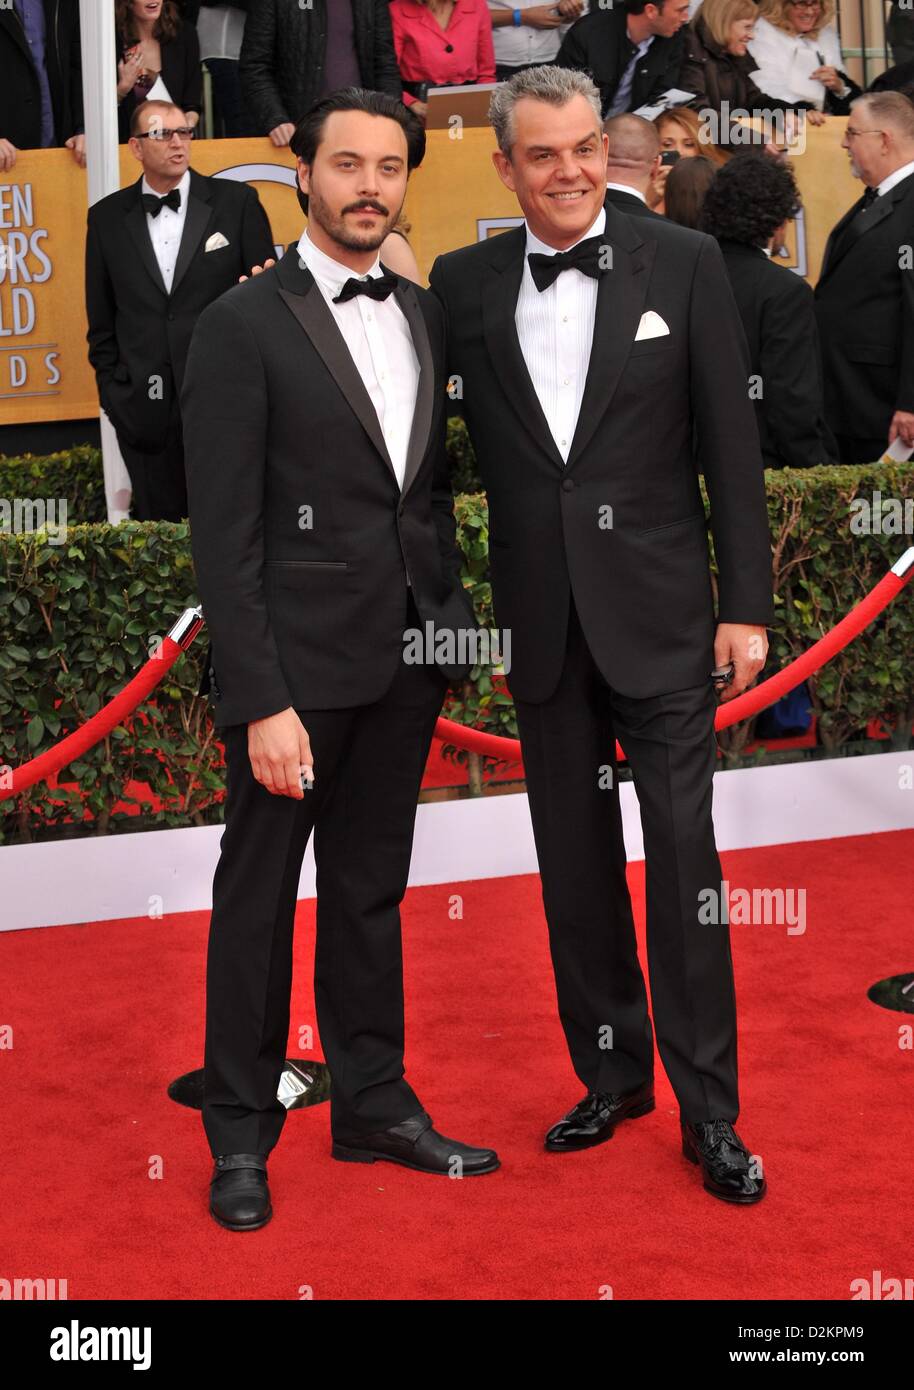 Los Angeles, California. 27th January 2013. Jack Huston, Danny Huston at arrivals for 19th Annual Screen Actors Guild Awards SAG 2013, Shrine Auditorium, Los Angeles, CA January 27, 2013. Photo By: Elizabeth Goodenough/Everett Collection/ Alamy Live News Stock Photo